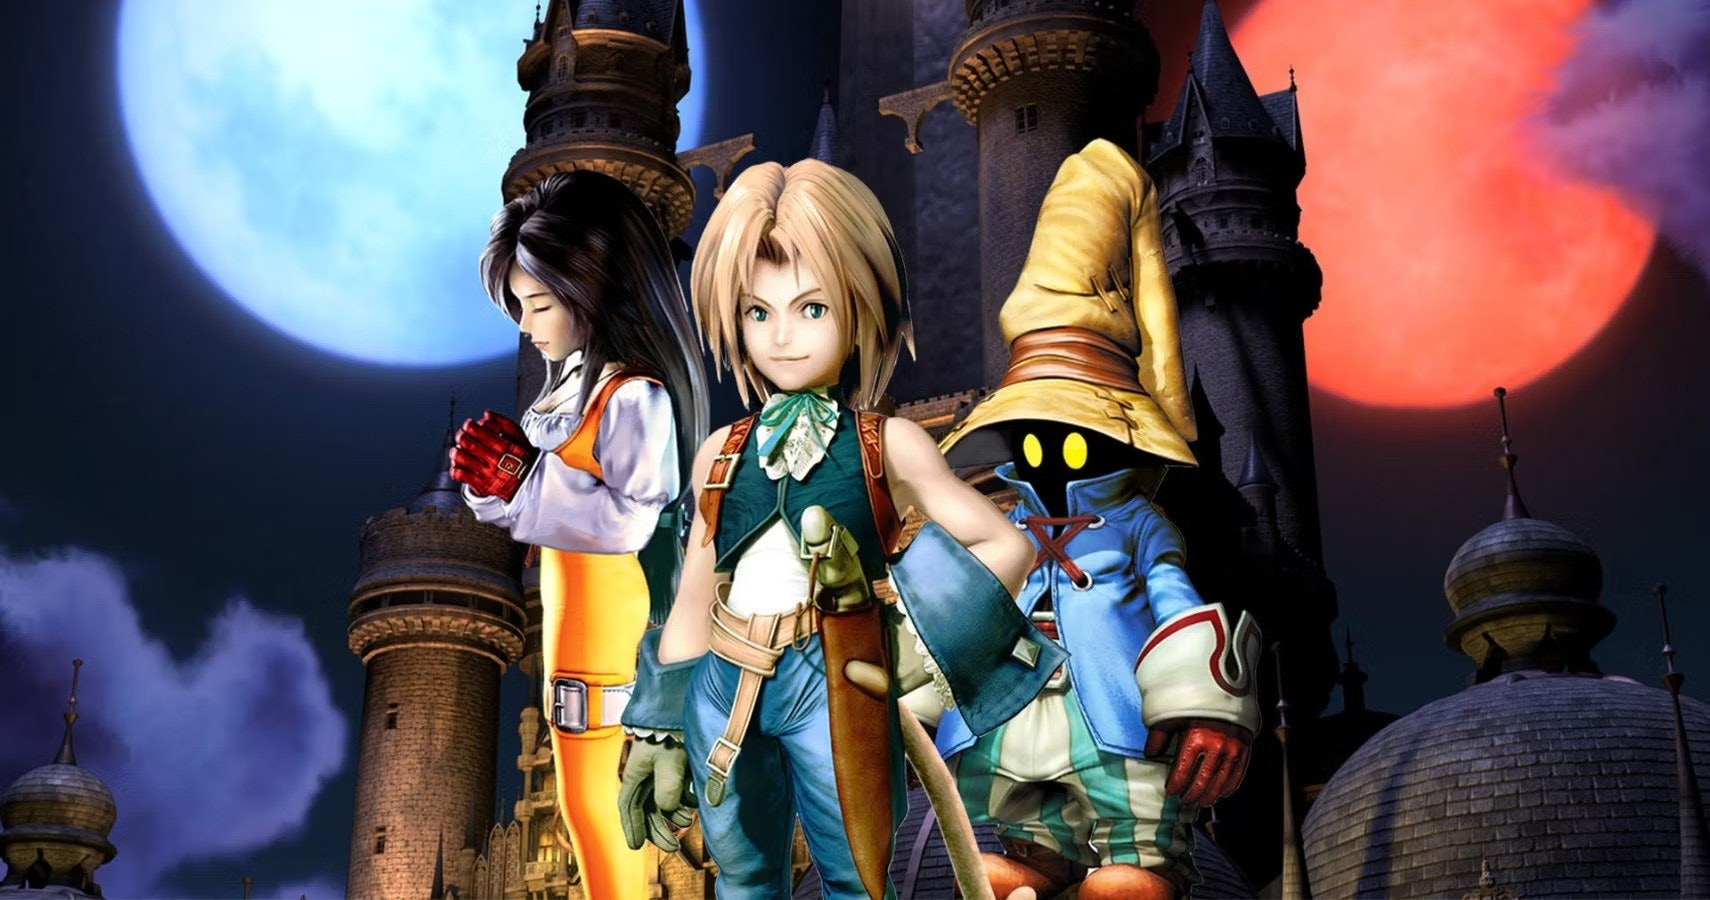 20+ Final Fantasy IX HD Wallpapers and Backgrounds